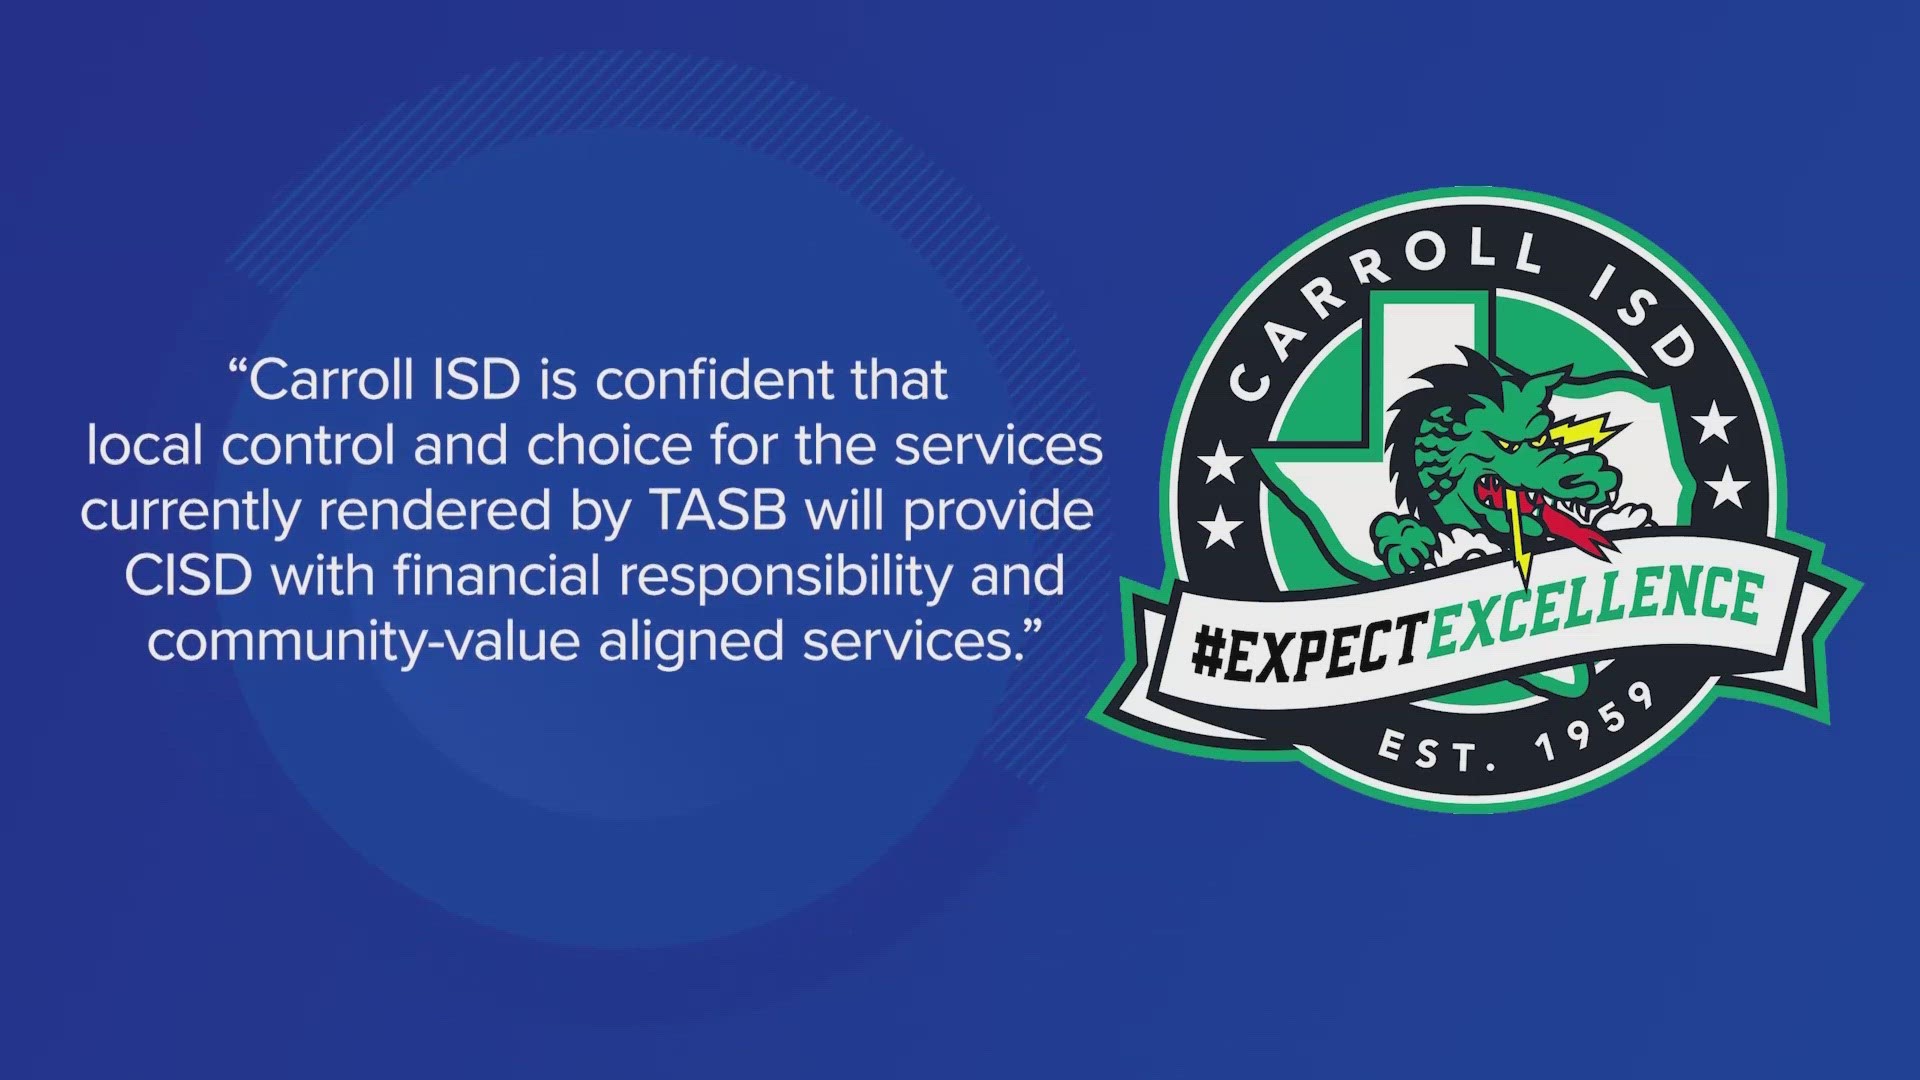 Carroll ISD is expected to be the first public school district in Texas to ends its membership with the Texas Association of School Boards.